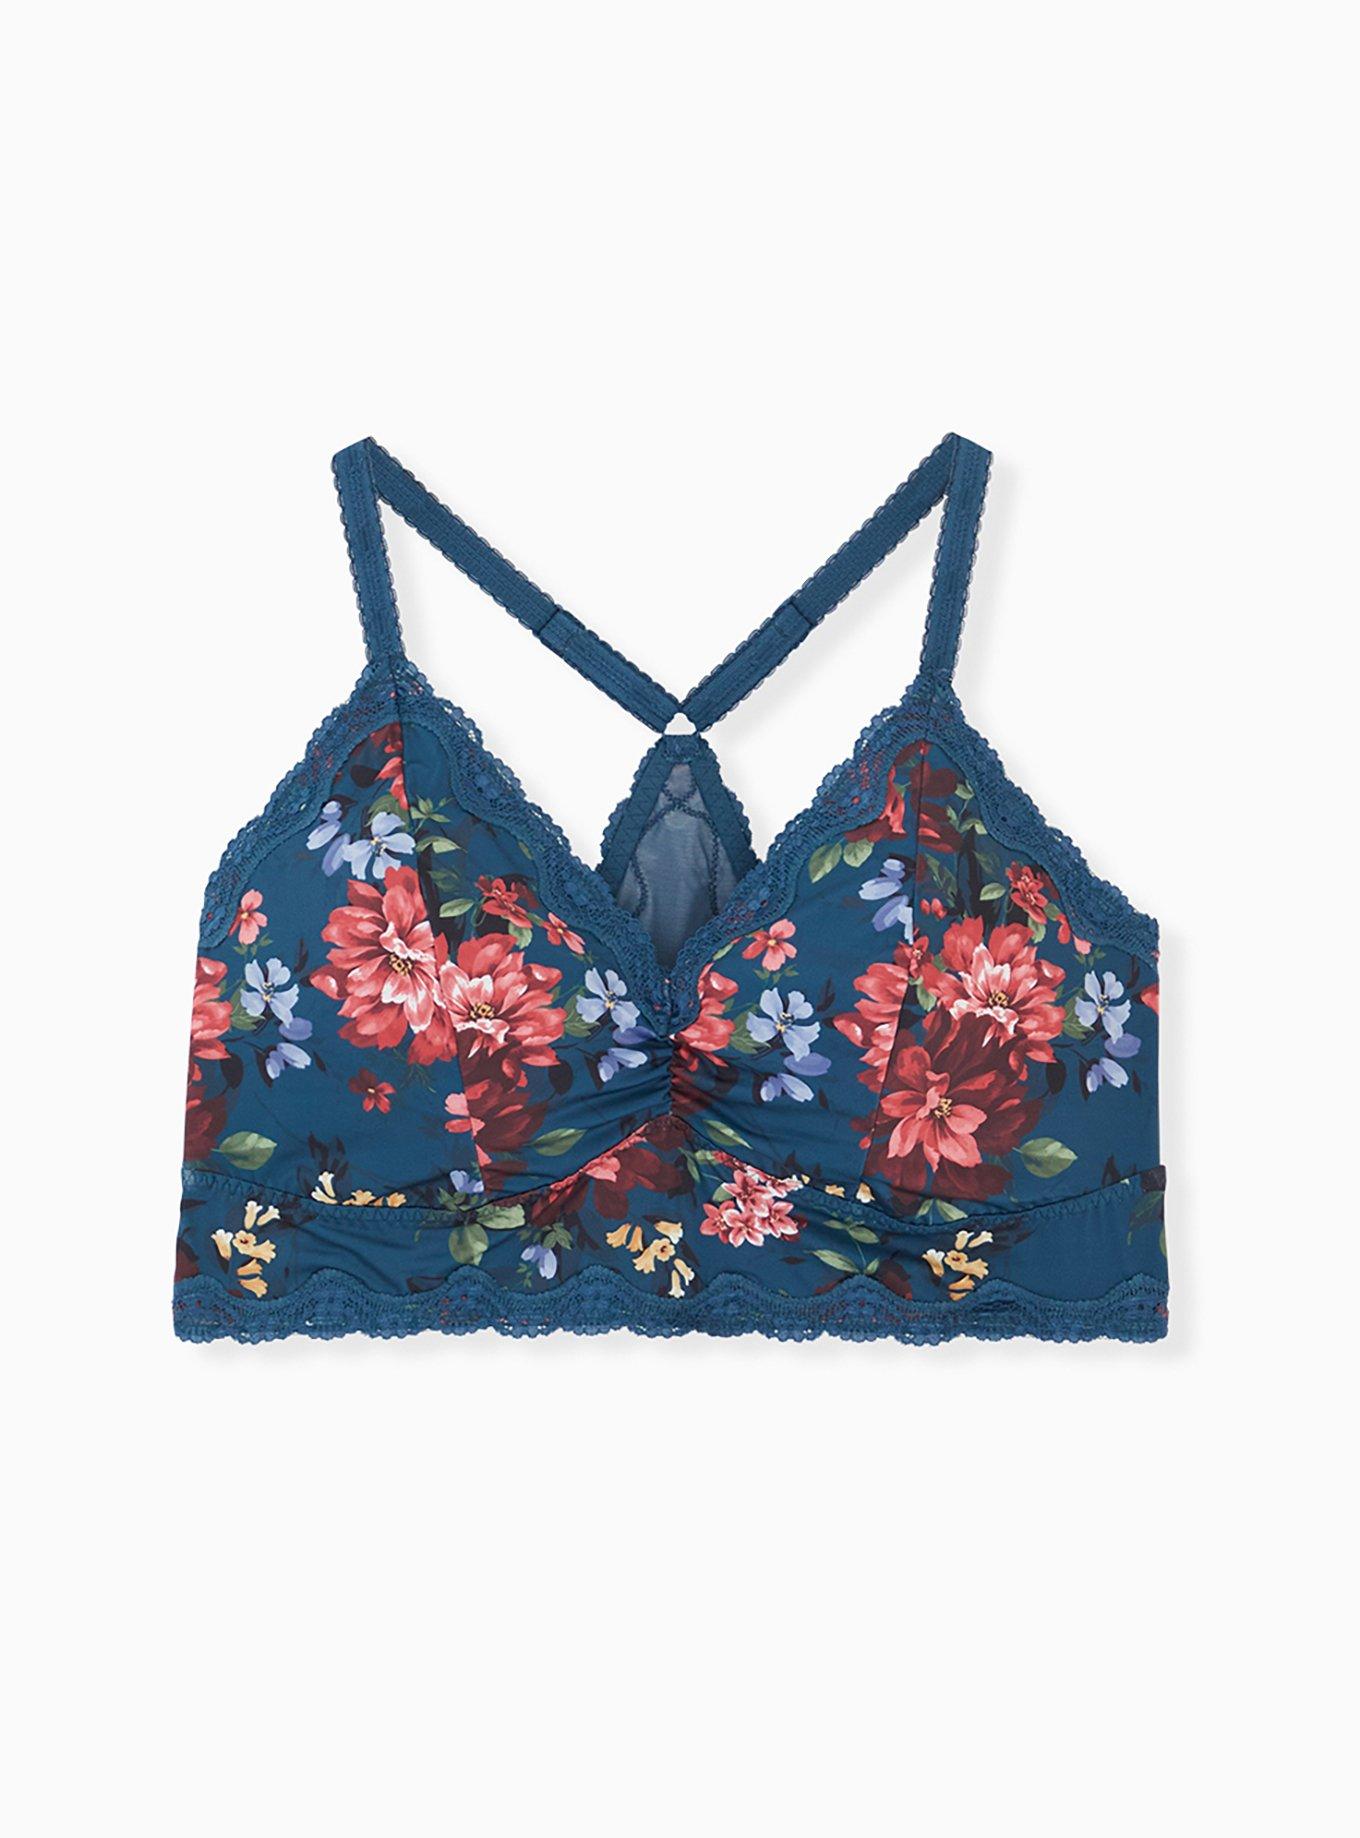 Plus Size - Unlined Microfiber With Lace Trim Printed Bralette